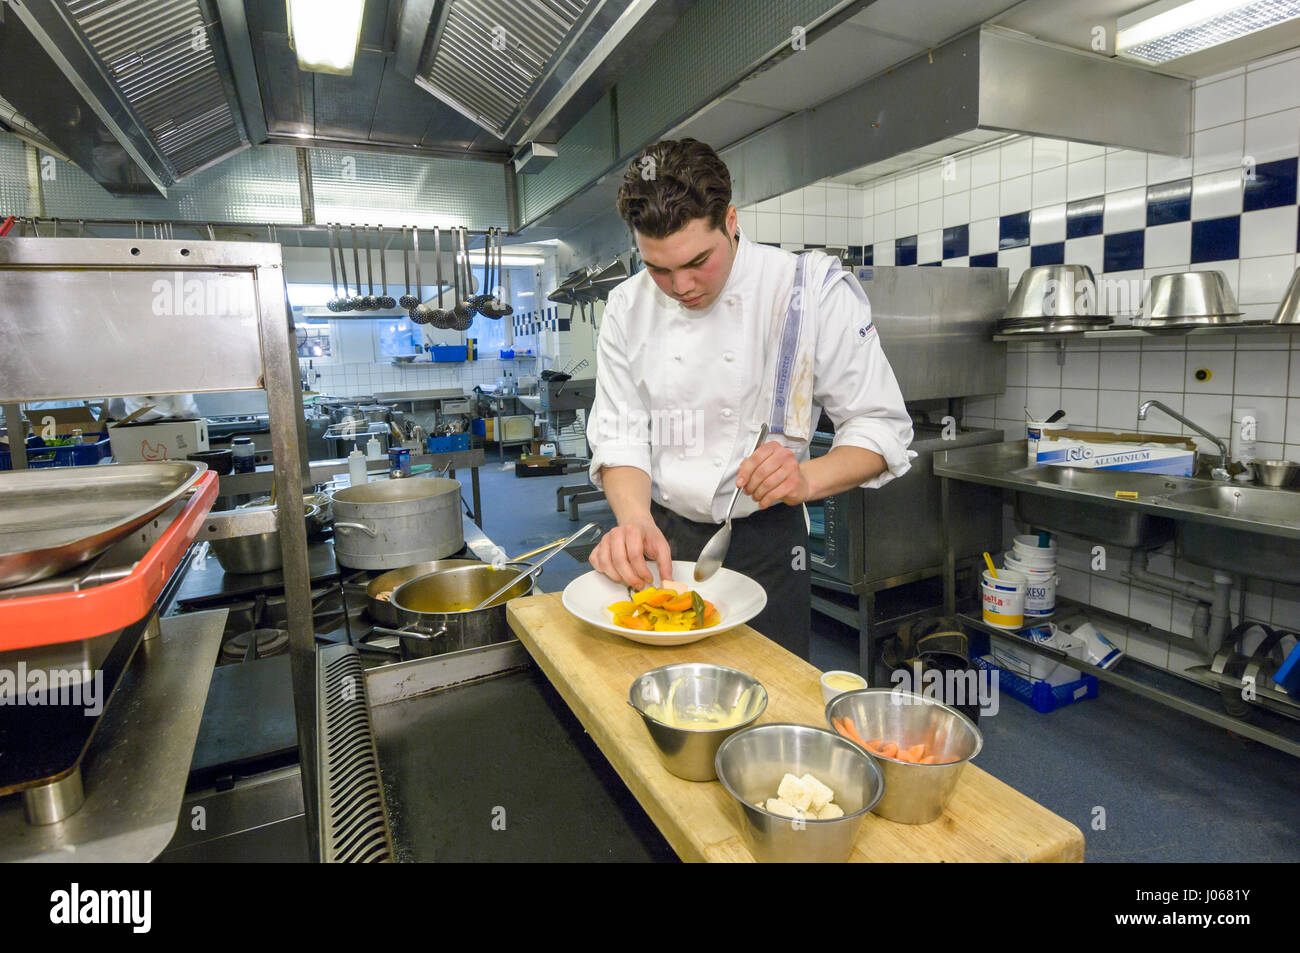 Students in a restaurant school learn to cook, Sweden. Stock Photo